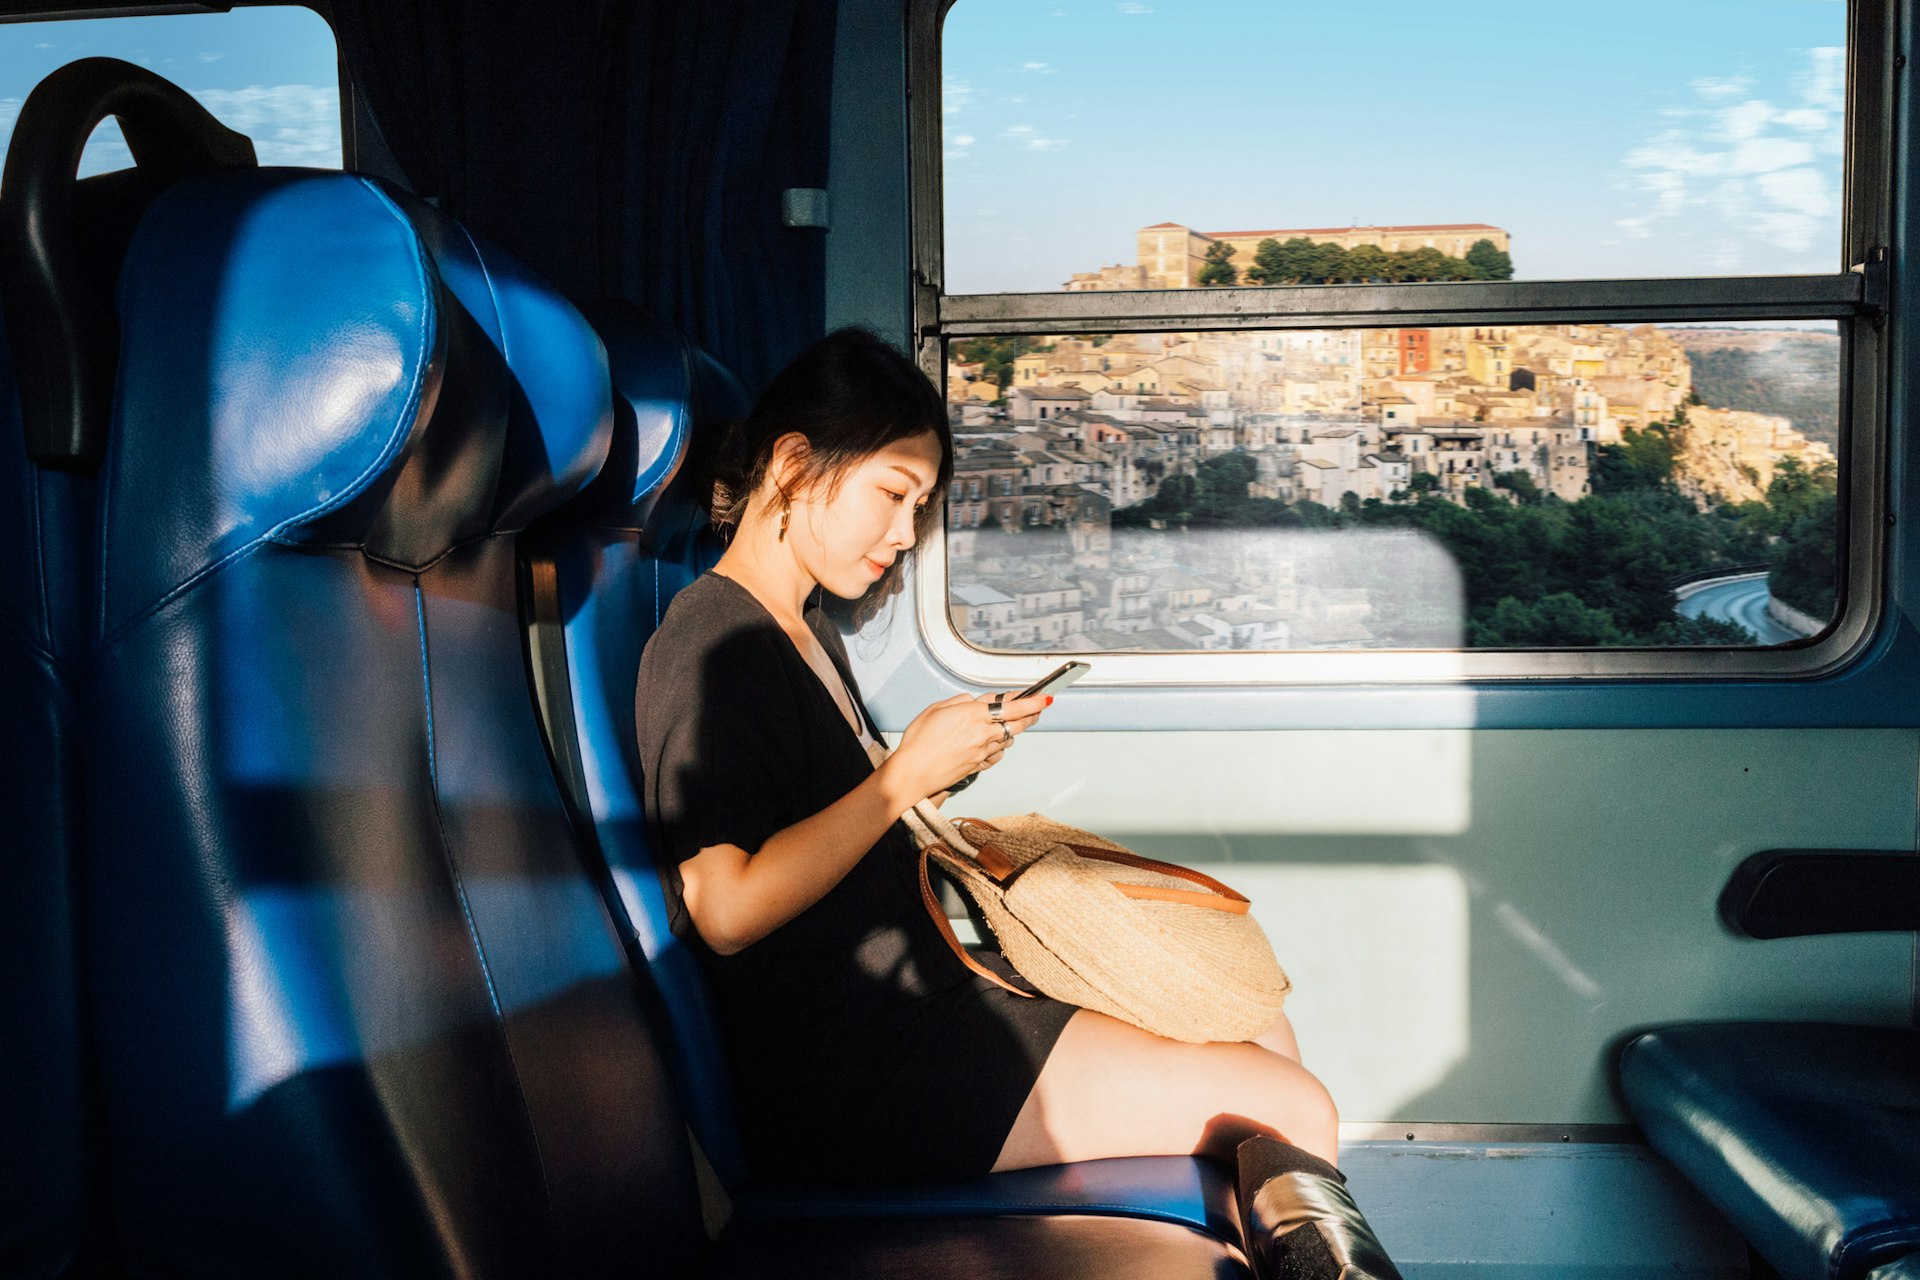 A young East Asian woman using her phone on a train in Sicily